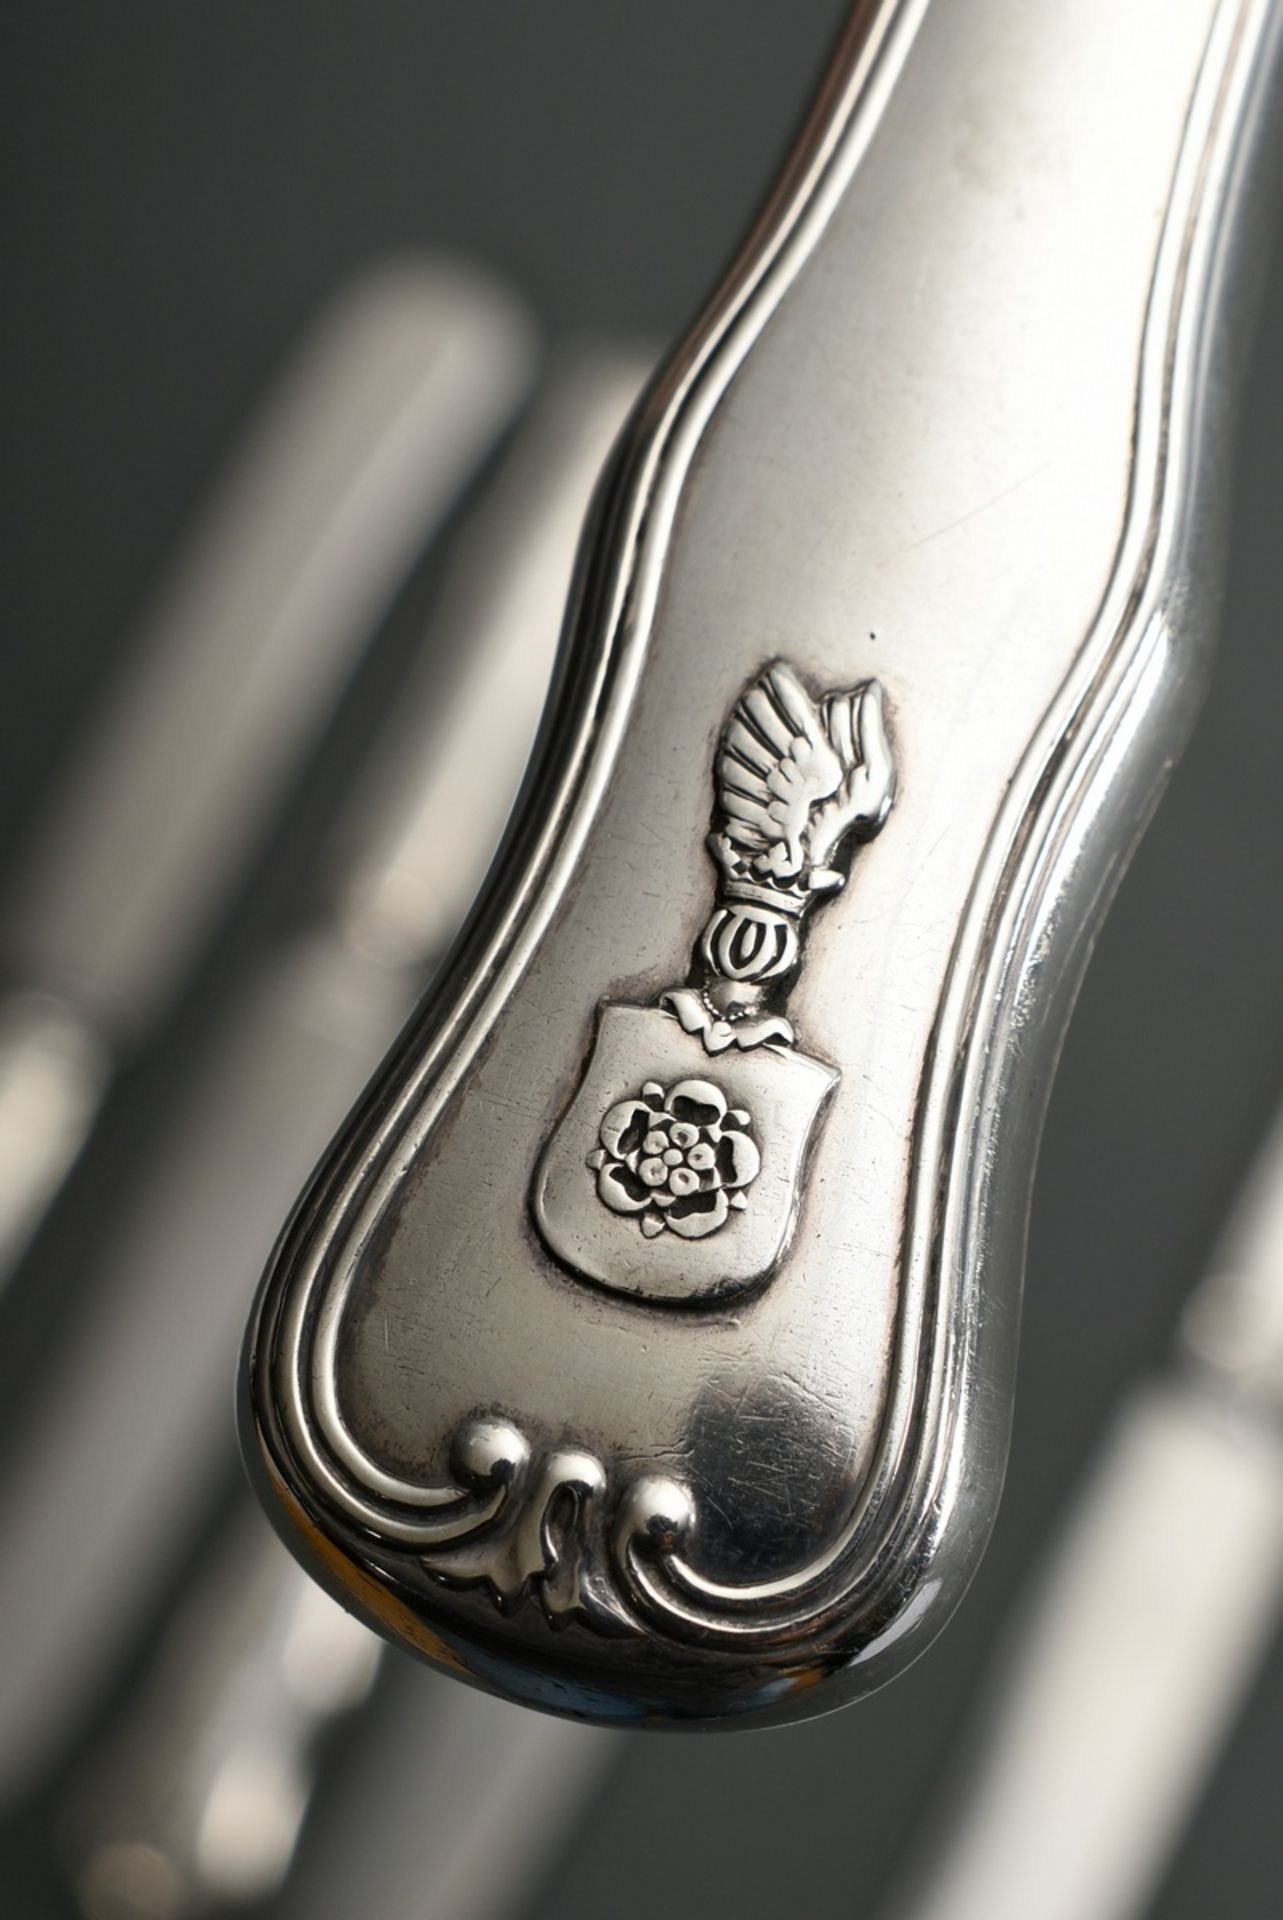 6 large knives with applied coat of arms ‘Rose under winged helmet’ and monogram ‘EJ’ under crown,  - Image 3 of 6